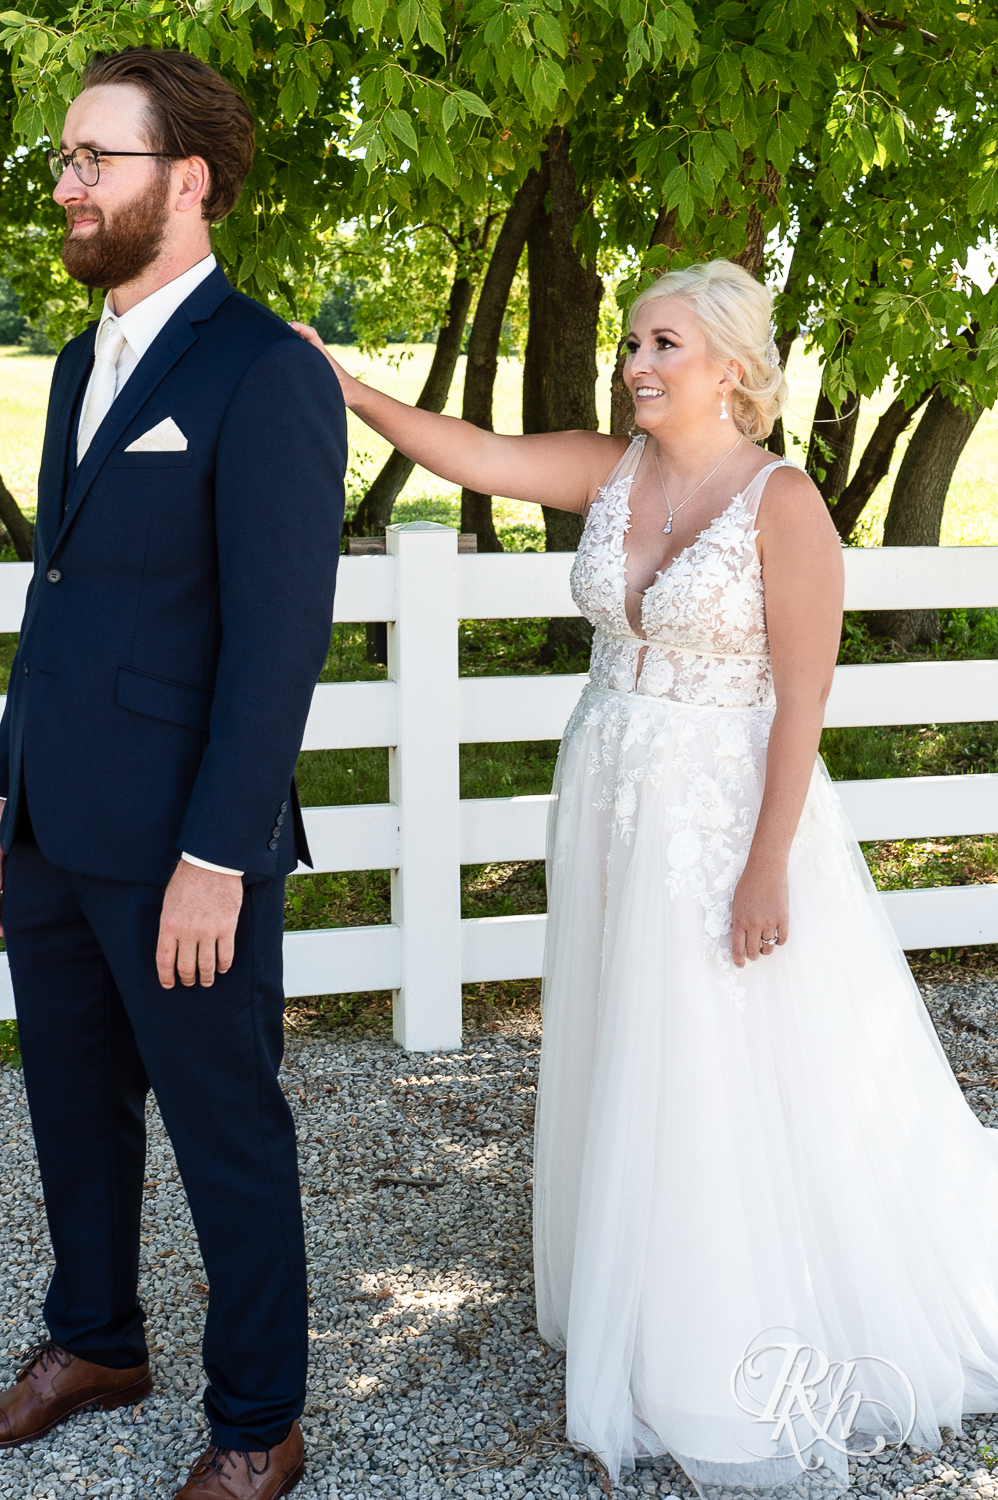 Bride and groom share first look at Green Acres Event Center in Eden Prairie, Minnesota.